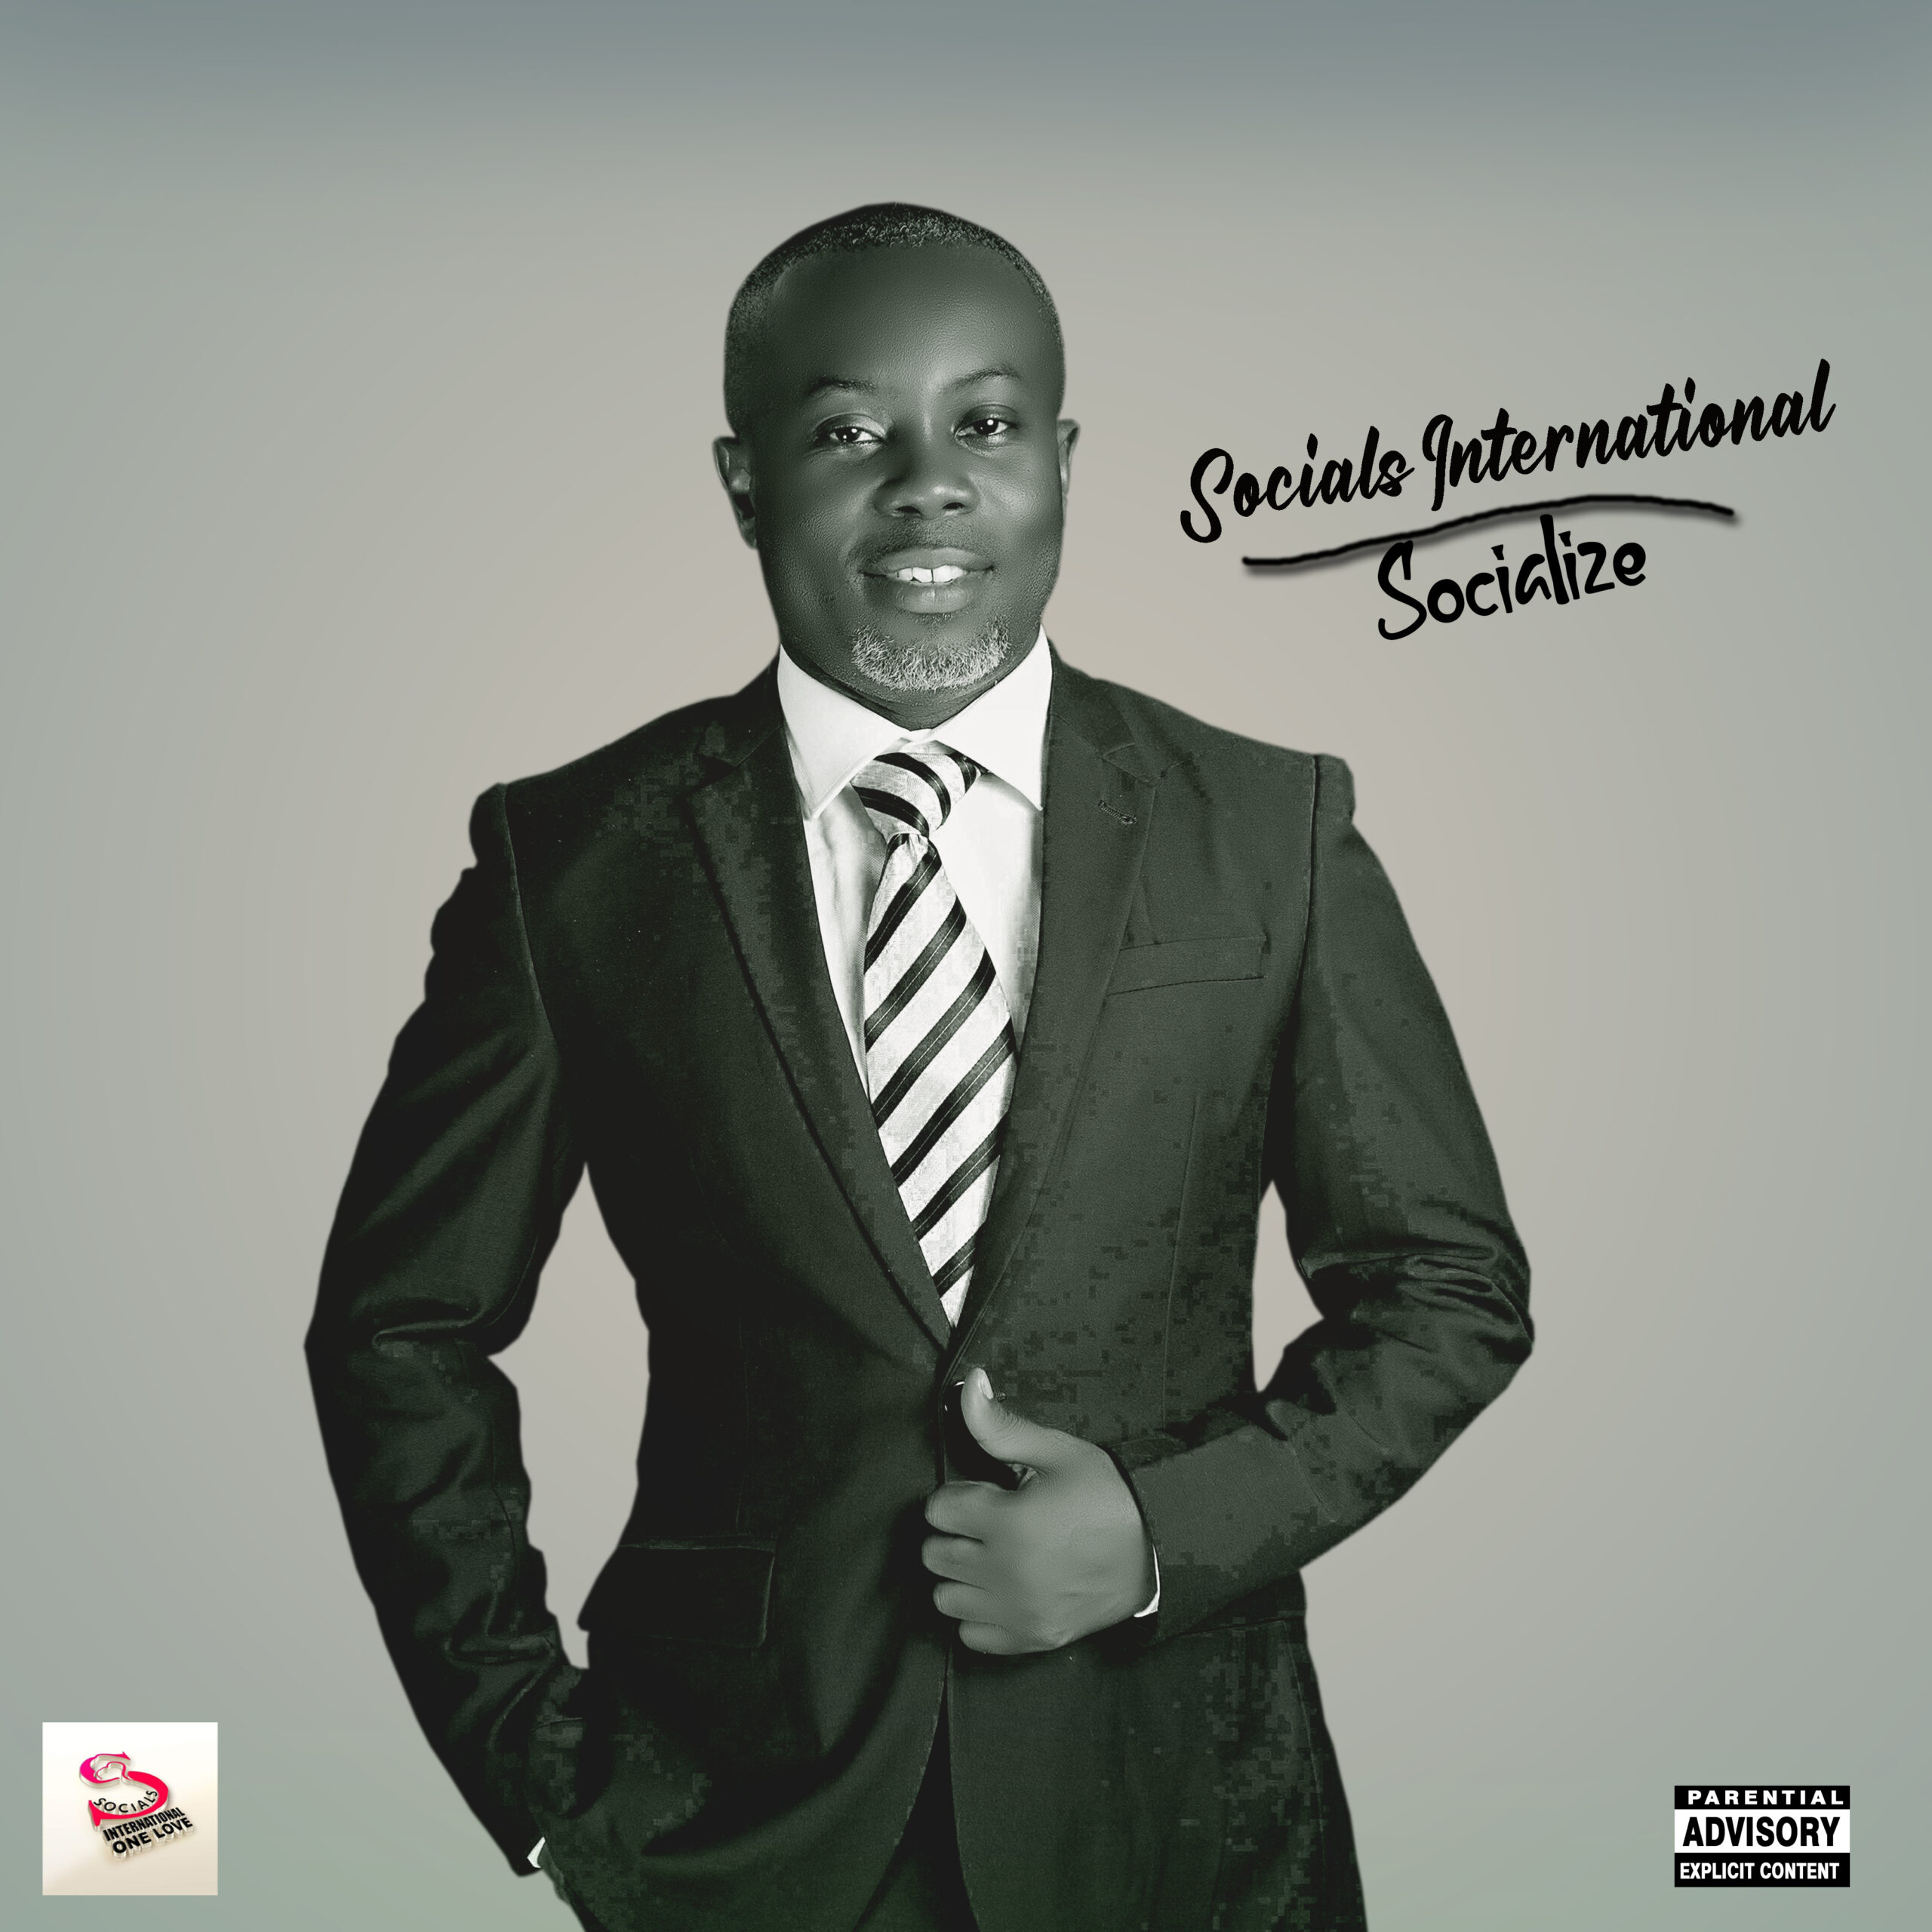 Listen To The New Socials International Album Tagged "SOCIALIZE" featuring Chiff Timz, Yawng Boss, Mas, Quiries, Arite and many more... 5